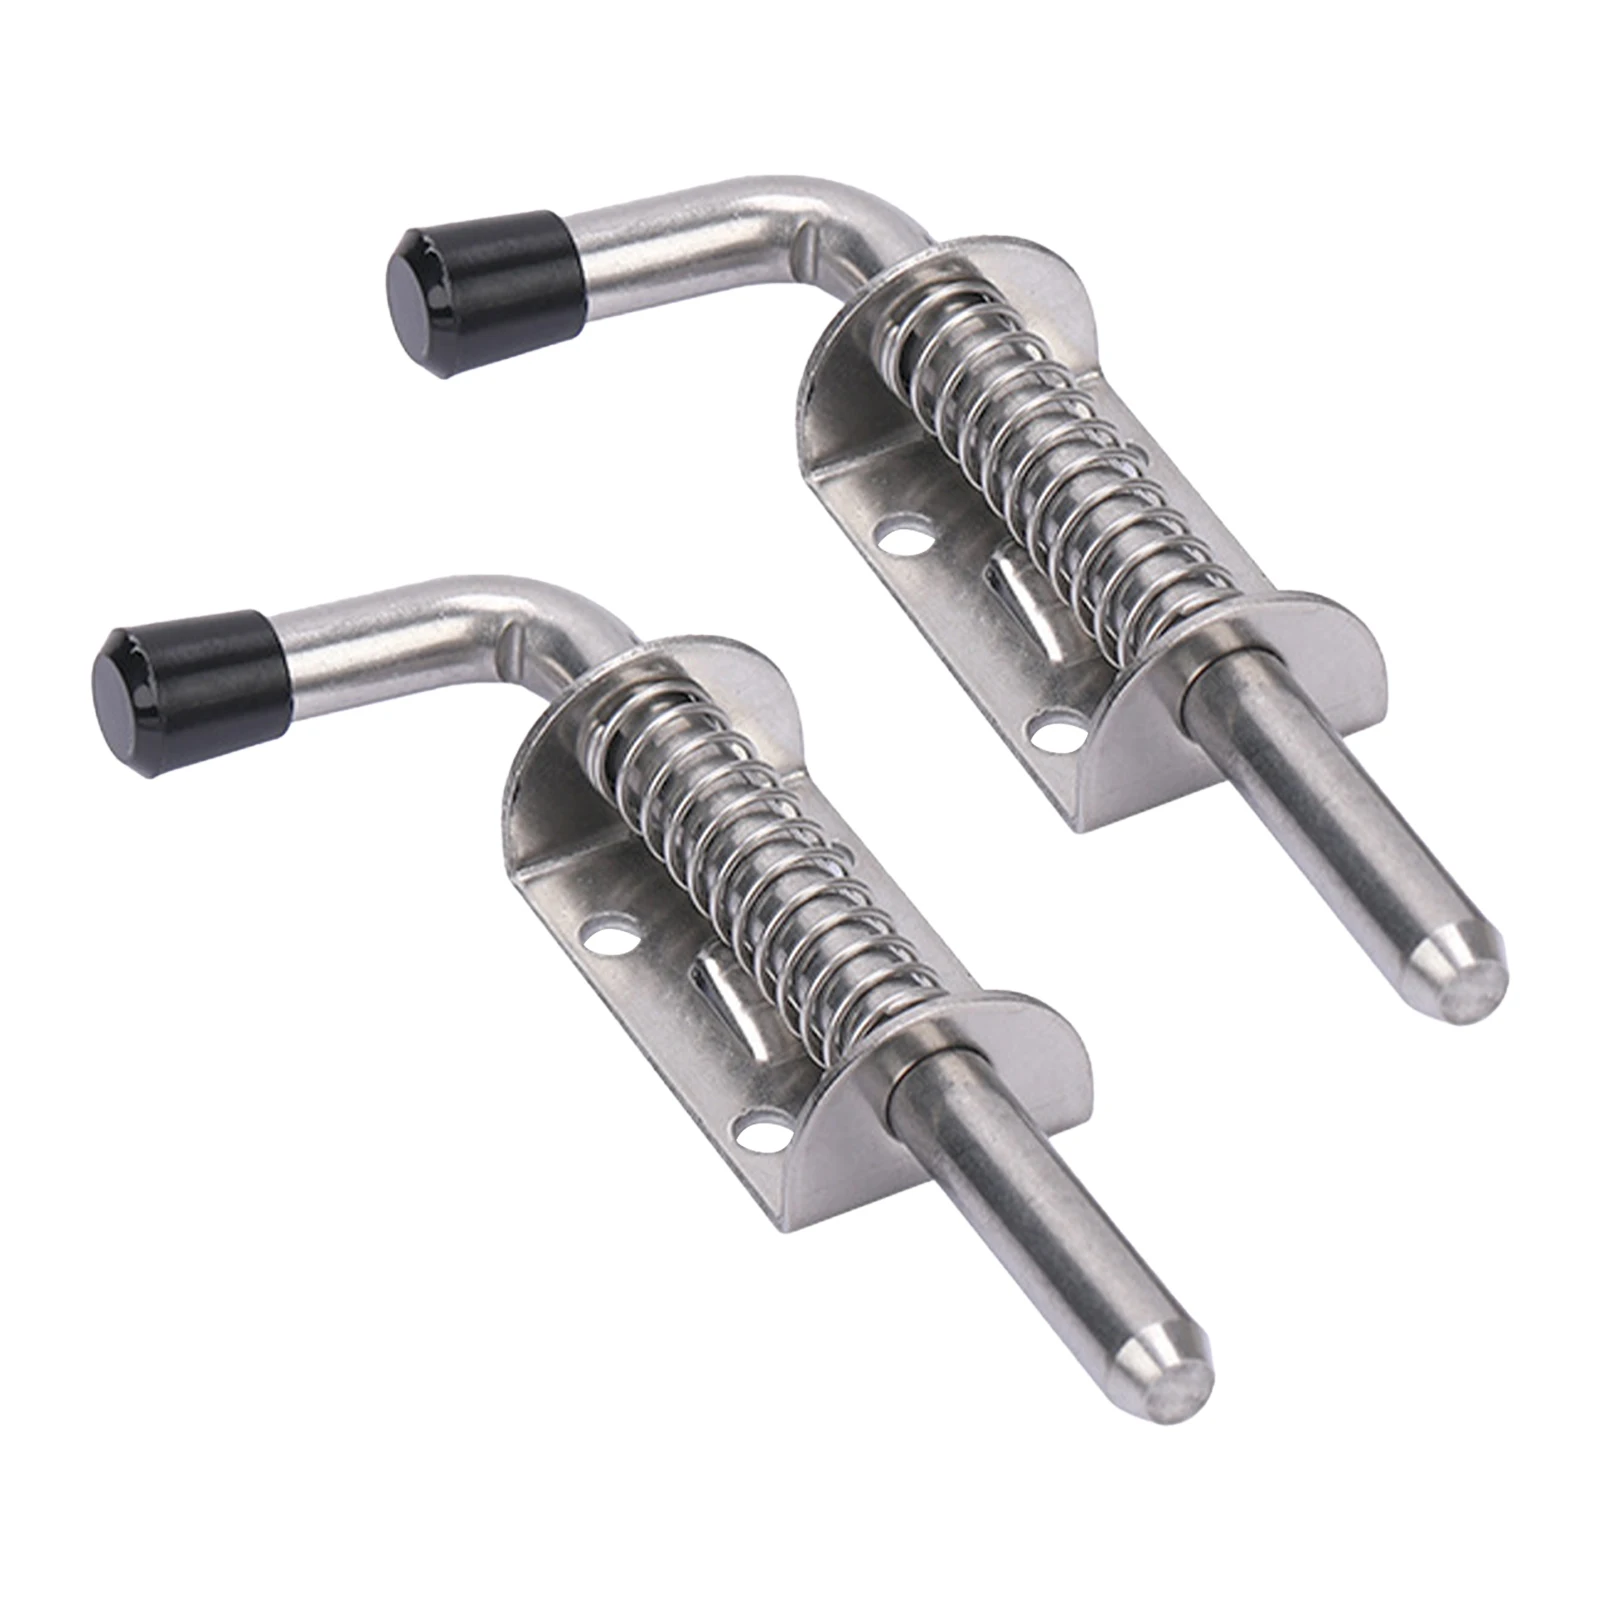 

2pcs Solid Sliding Stainless Steel Heavy Duty Barrel Bolt Chests Hardware Interior Latch Pin Thickened Outdoor Spring Loaded